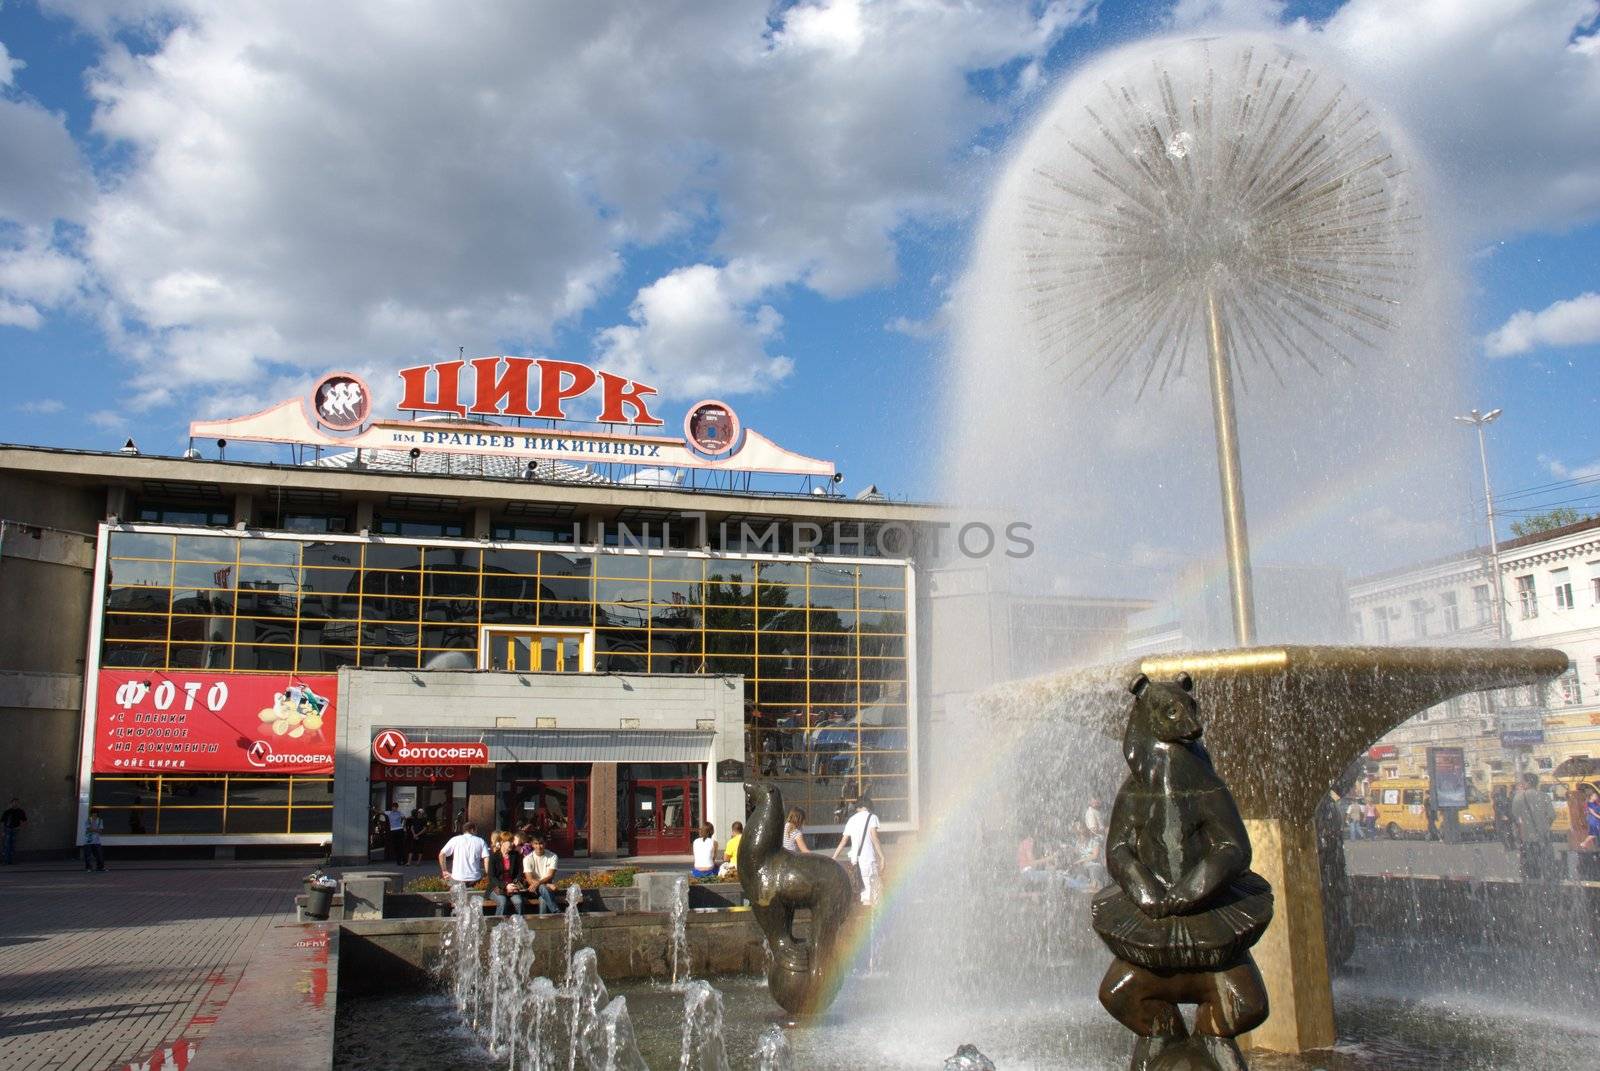 The building is a circus and a fountain "Dandelion" by Light